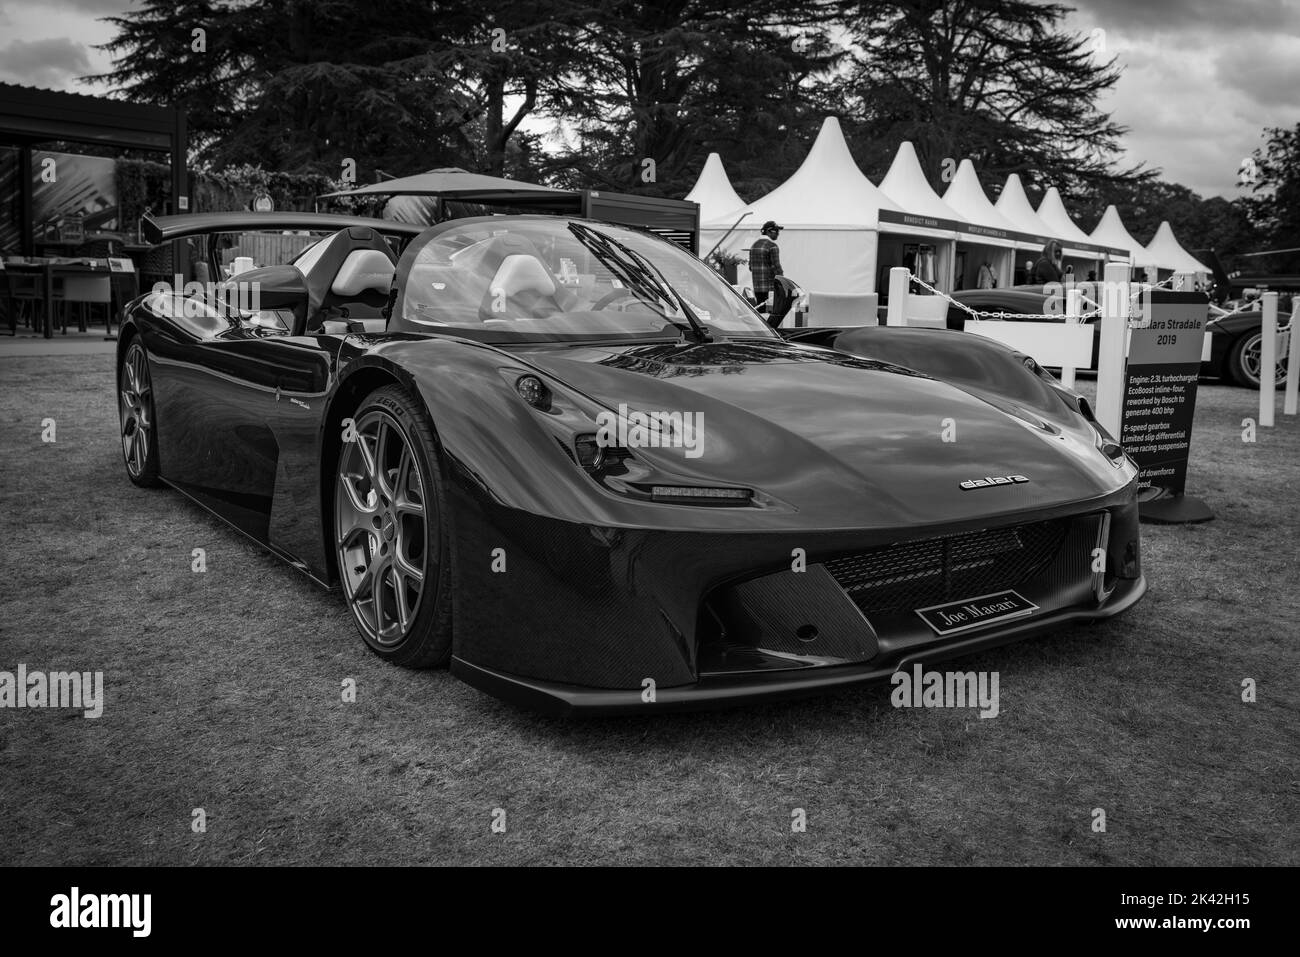 Dallara Stradale Italian sports car on display at the Salon Privé Concours d’Elégance motor show held at Blenheim Palace Stock Photo